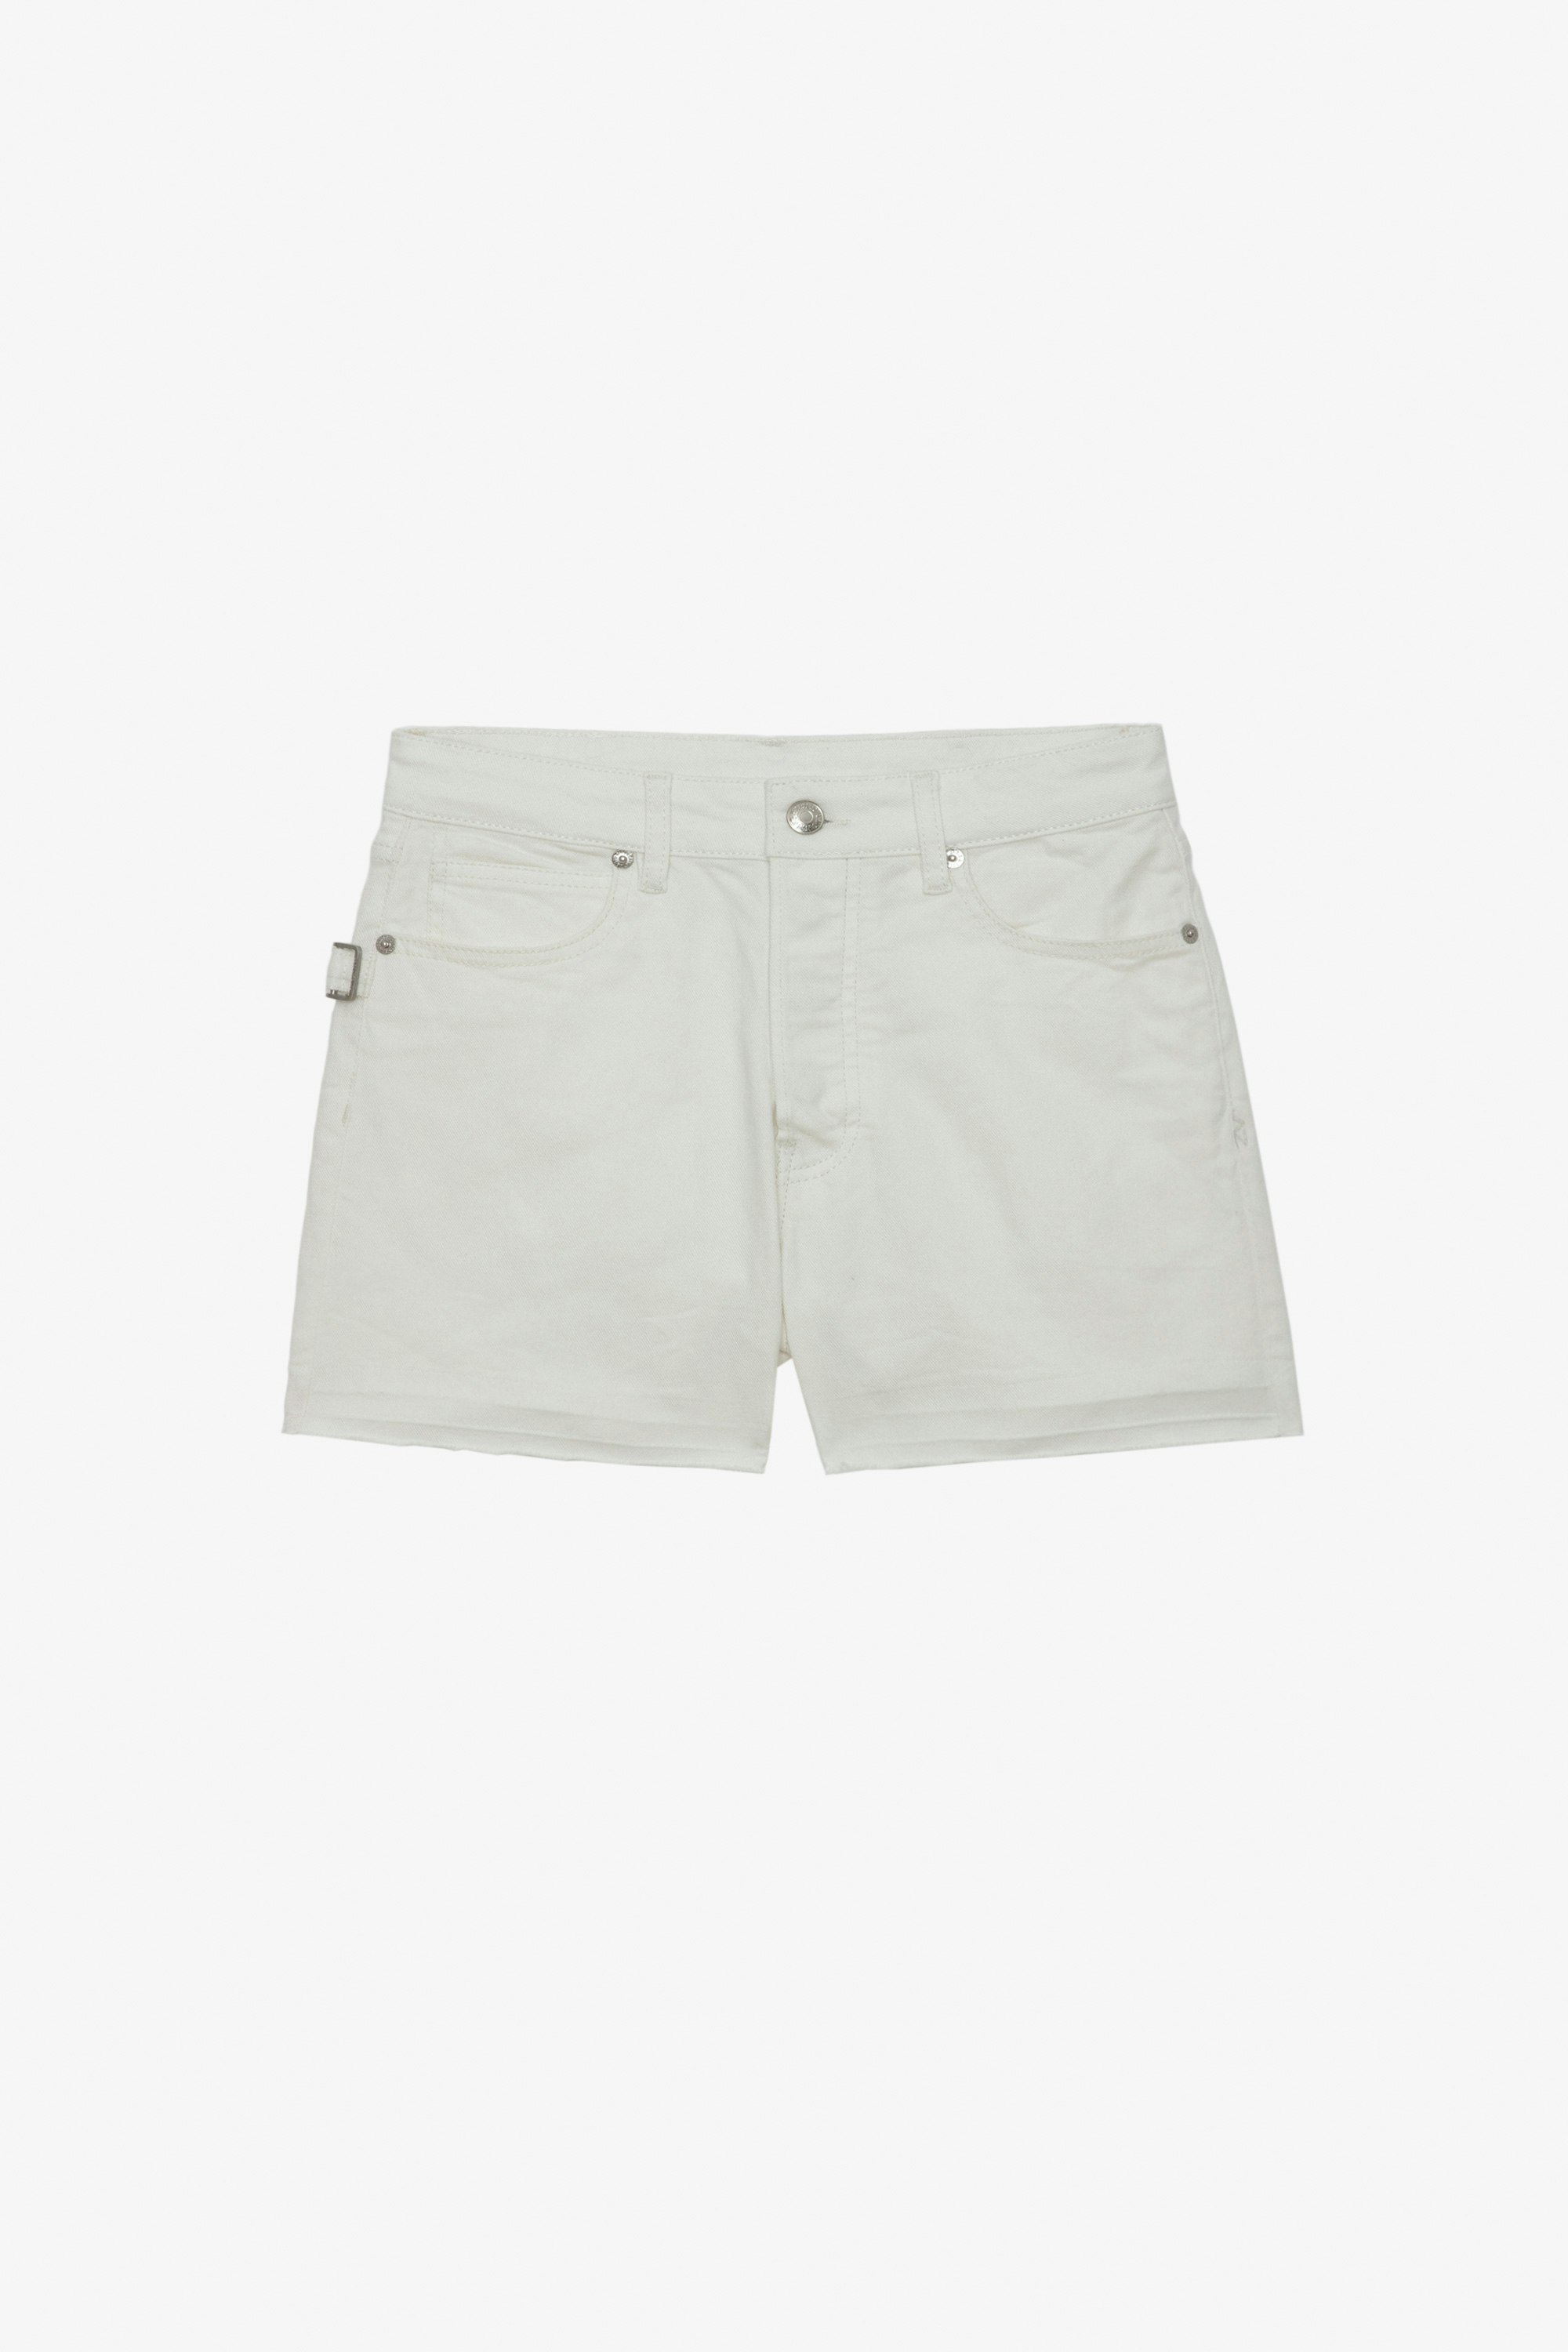 Sissi Denim Shorts - White denim shorts with pockets, overstitched details and raw hems.